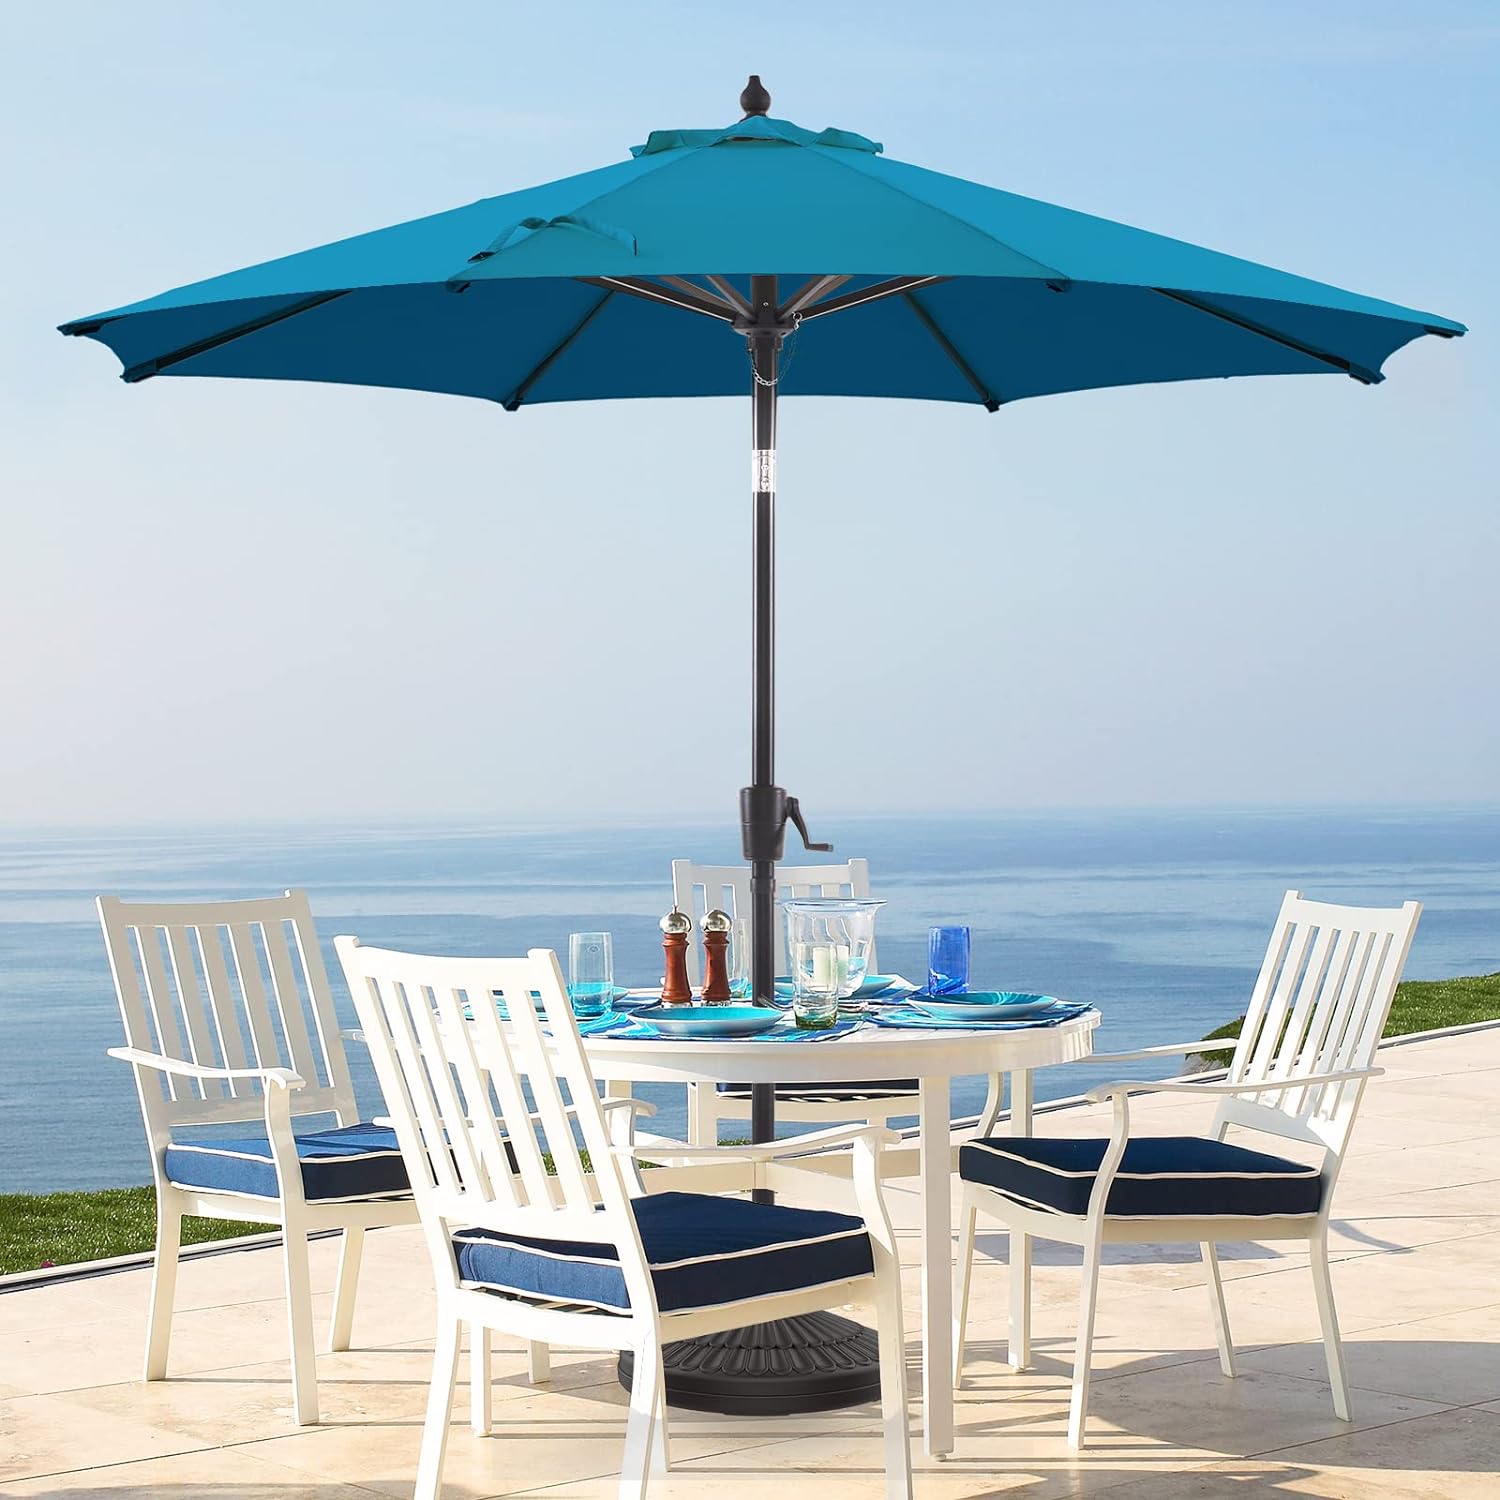 wikiwiki Olefin 9 FT Market Umbrella Patio Outdoor Table Umbrellas with 3-Year Nonfading Olefin Canopy and Push Button Tilt for Garden, Lawn, Backyard & Pool, Azure Blue